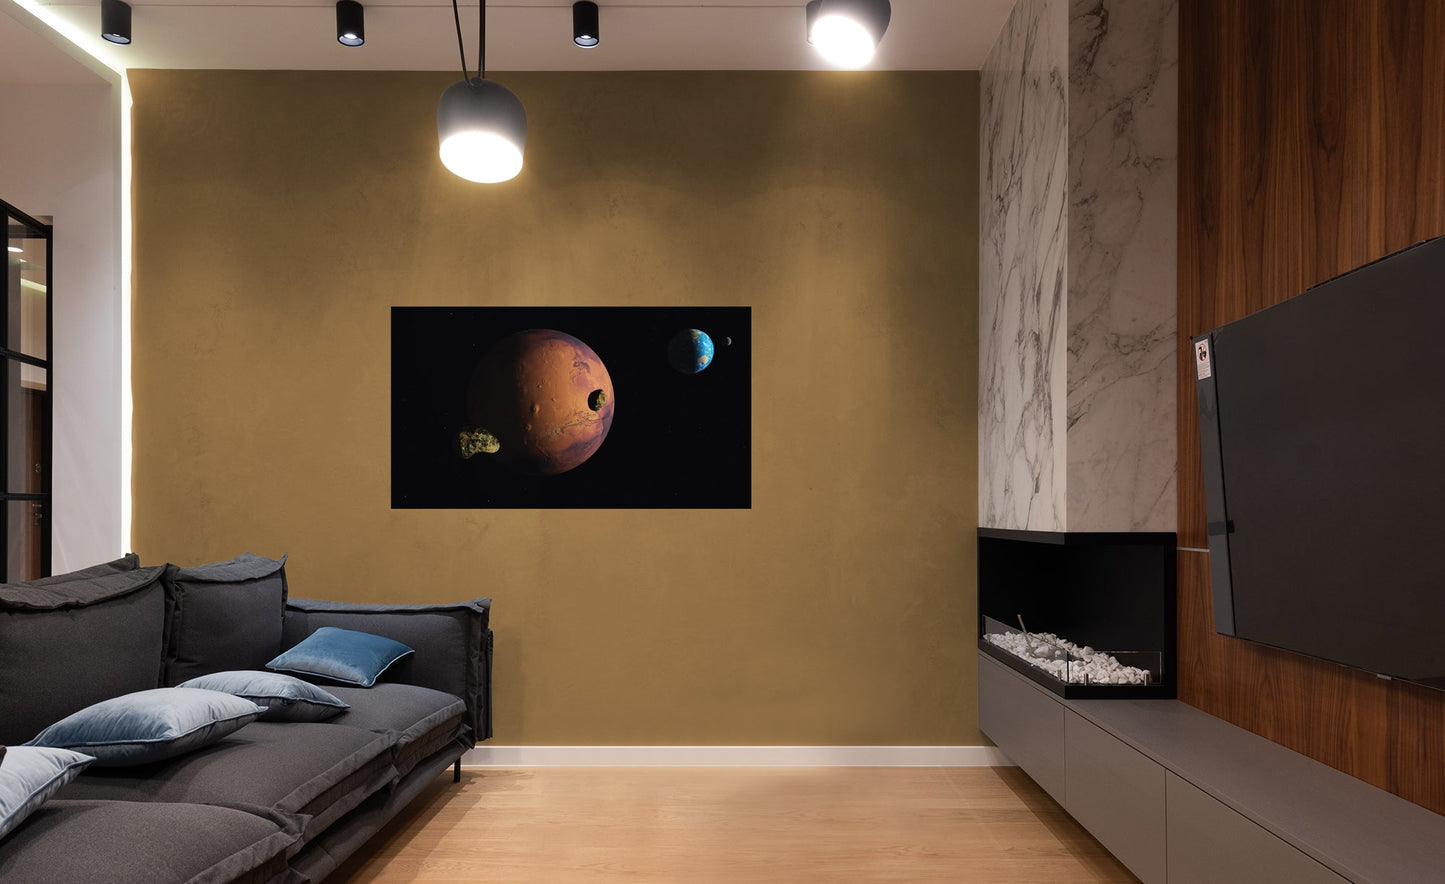 Planets:  Close-Up Mural        -   Removable     Adhesive Decal